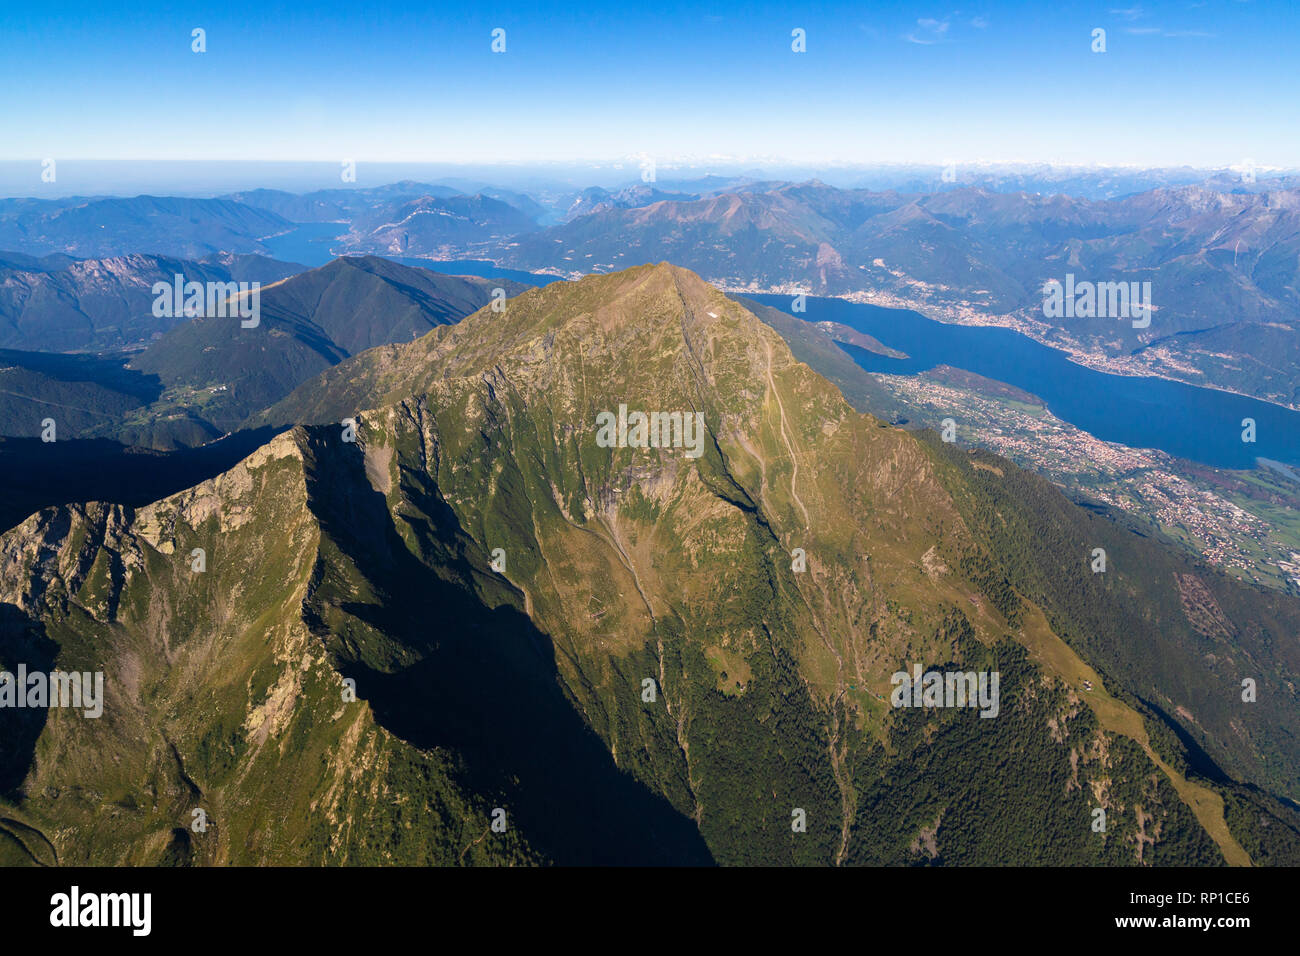 Aerial view of Grigna (Grignone) with Lake Como in the background, Valsassina, Lecco province, Lombardy, Italy Stock Photo